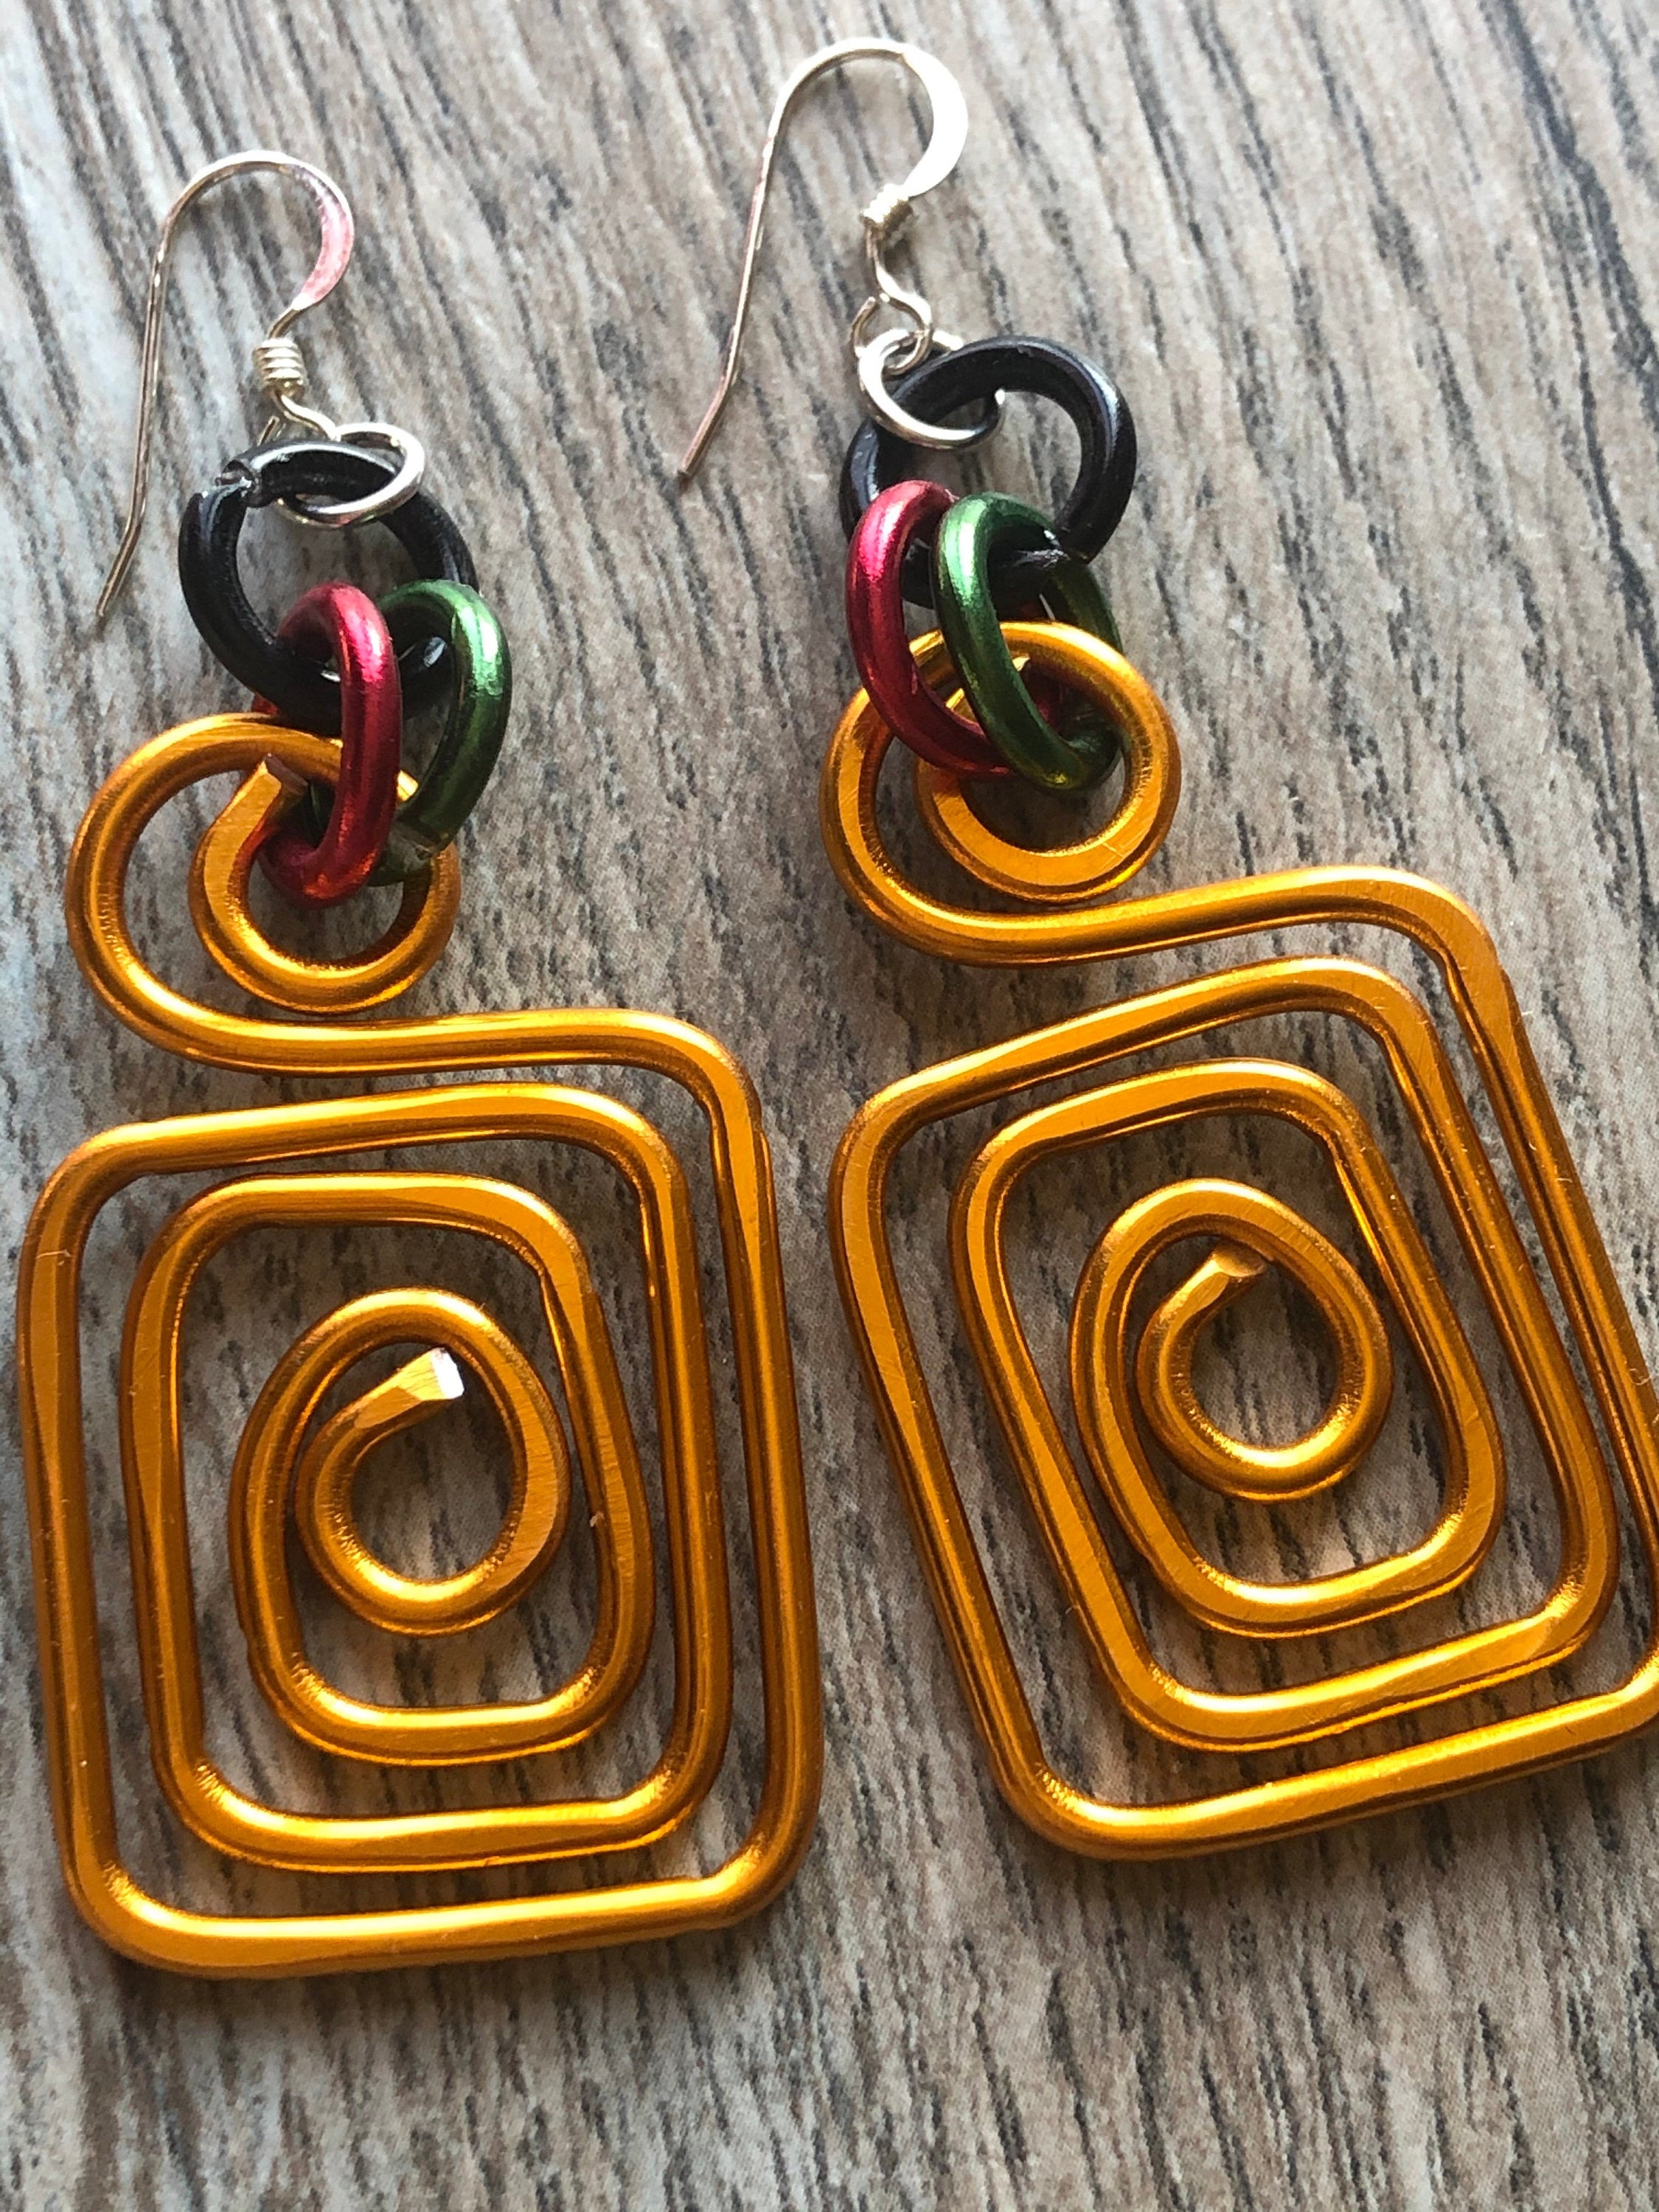 Gold Earrings, Black Panther Inspired Earrings, Square Afrocentric Earrings